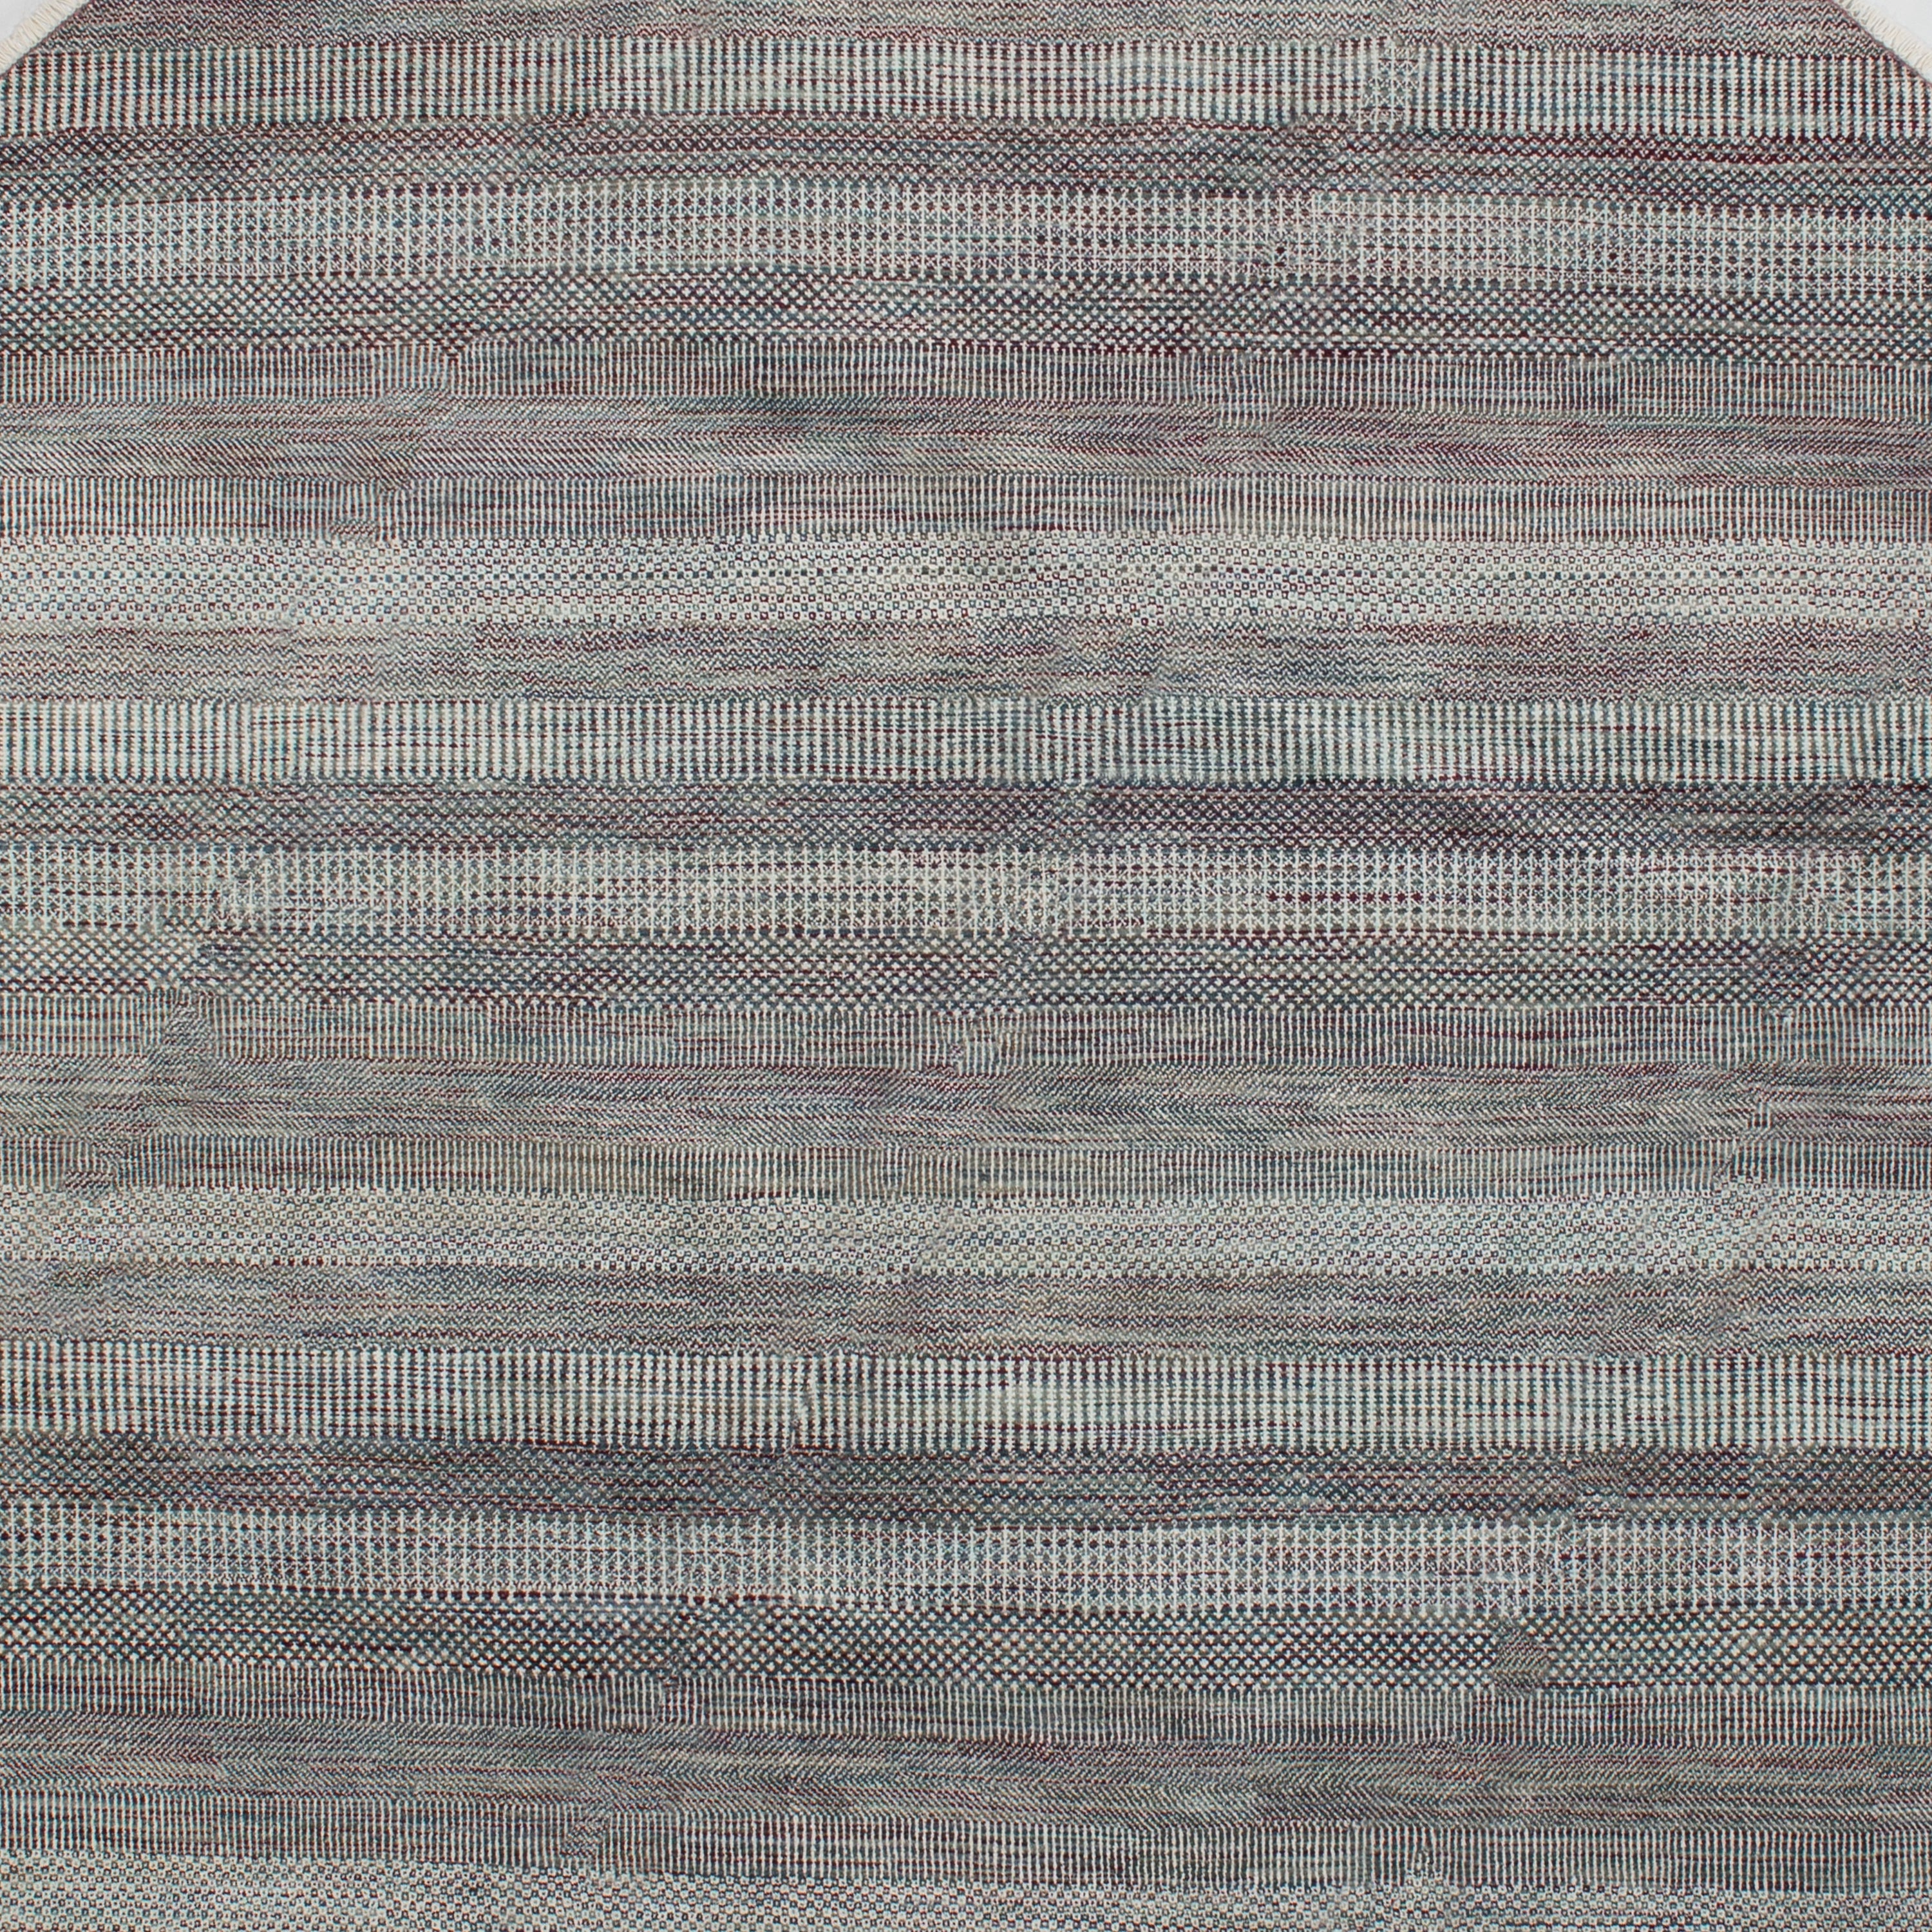 Hand-knotted Wool Rug - 10'3" x 10'3" Default Title